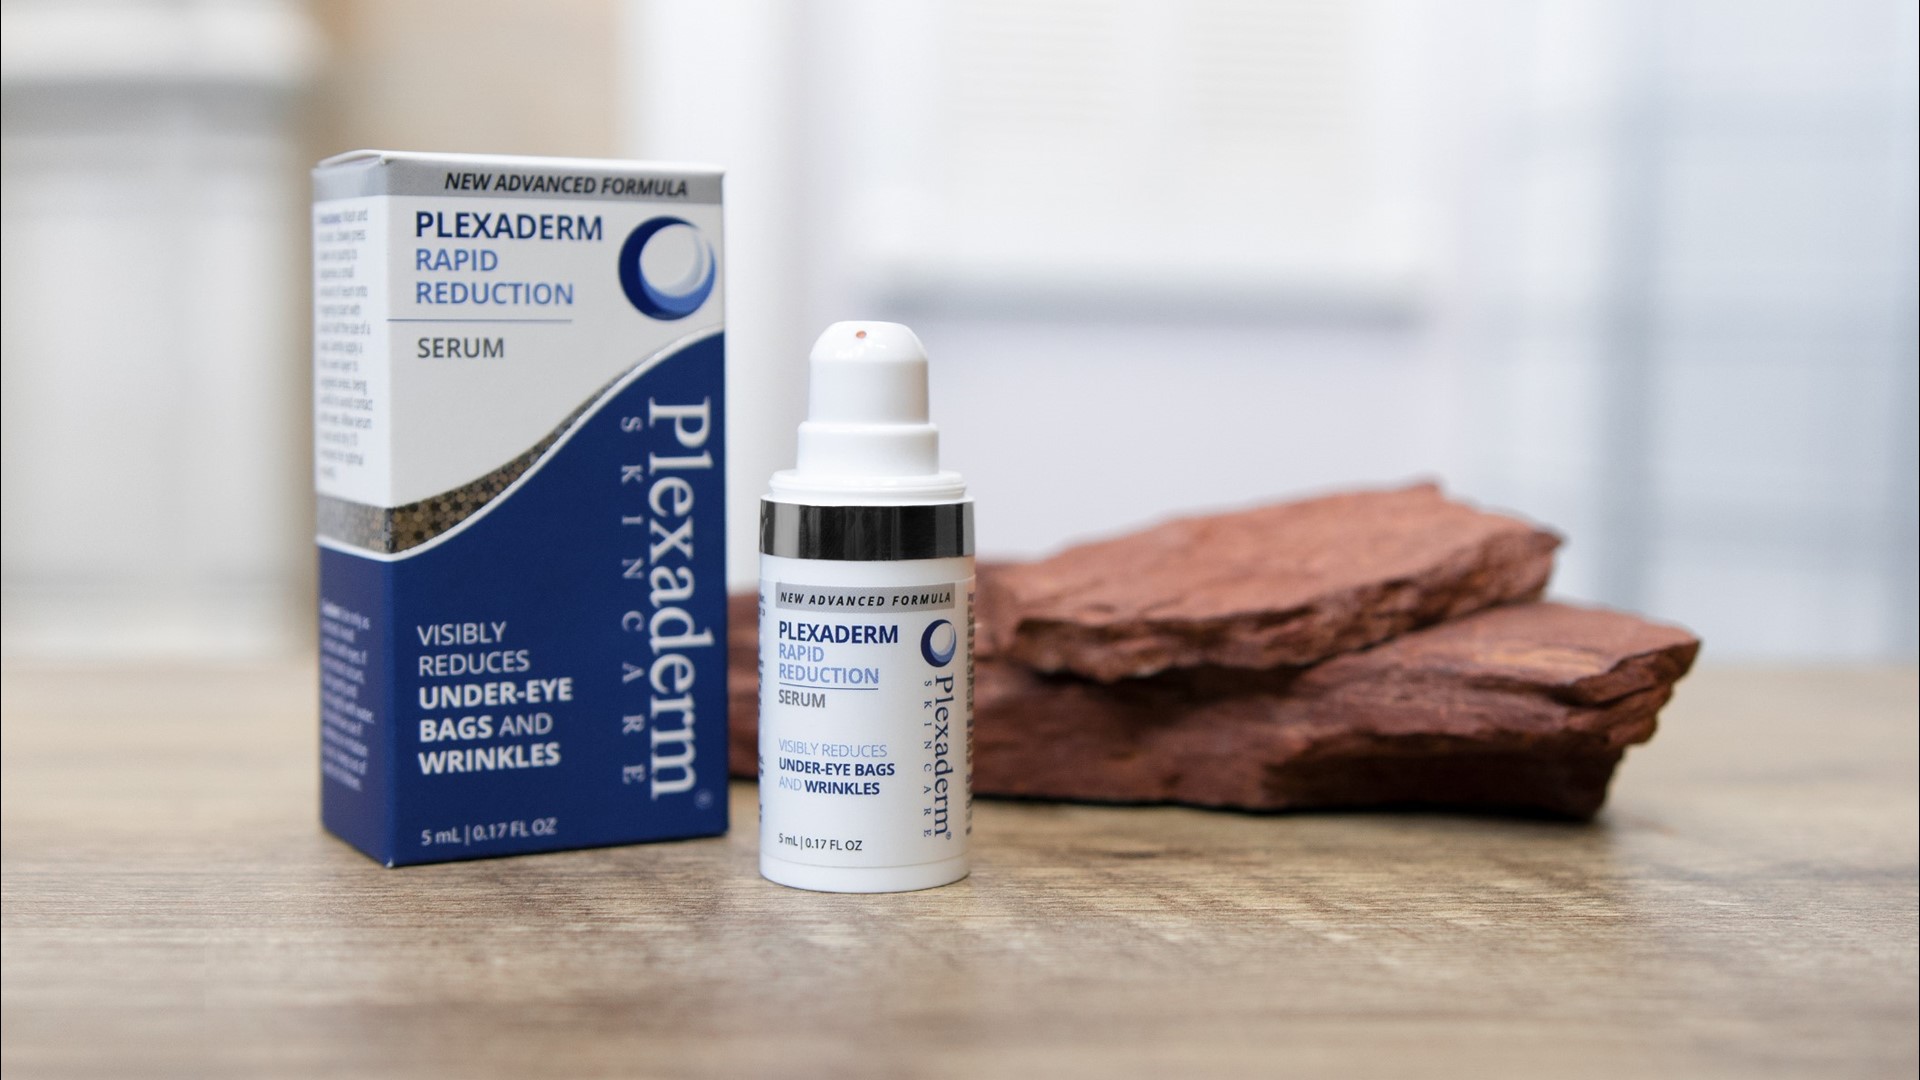 The serum is completely non-invasive and takes just minutes to apply. Sponsored by Plexaderm.